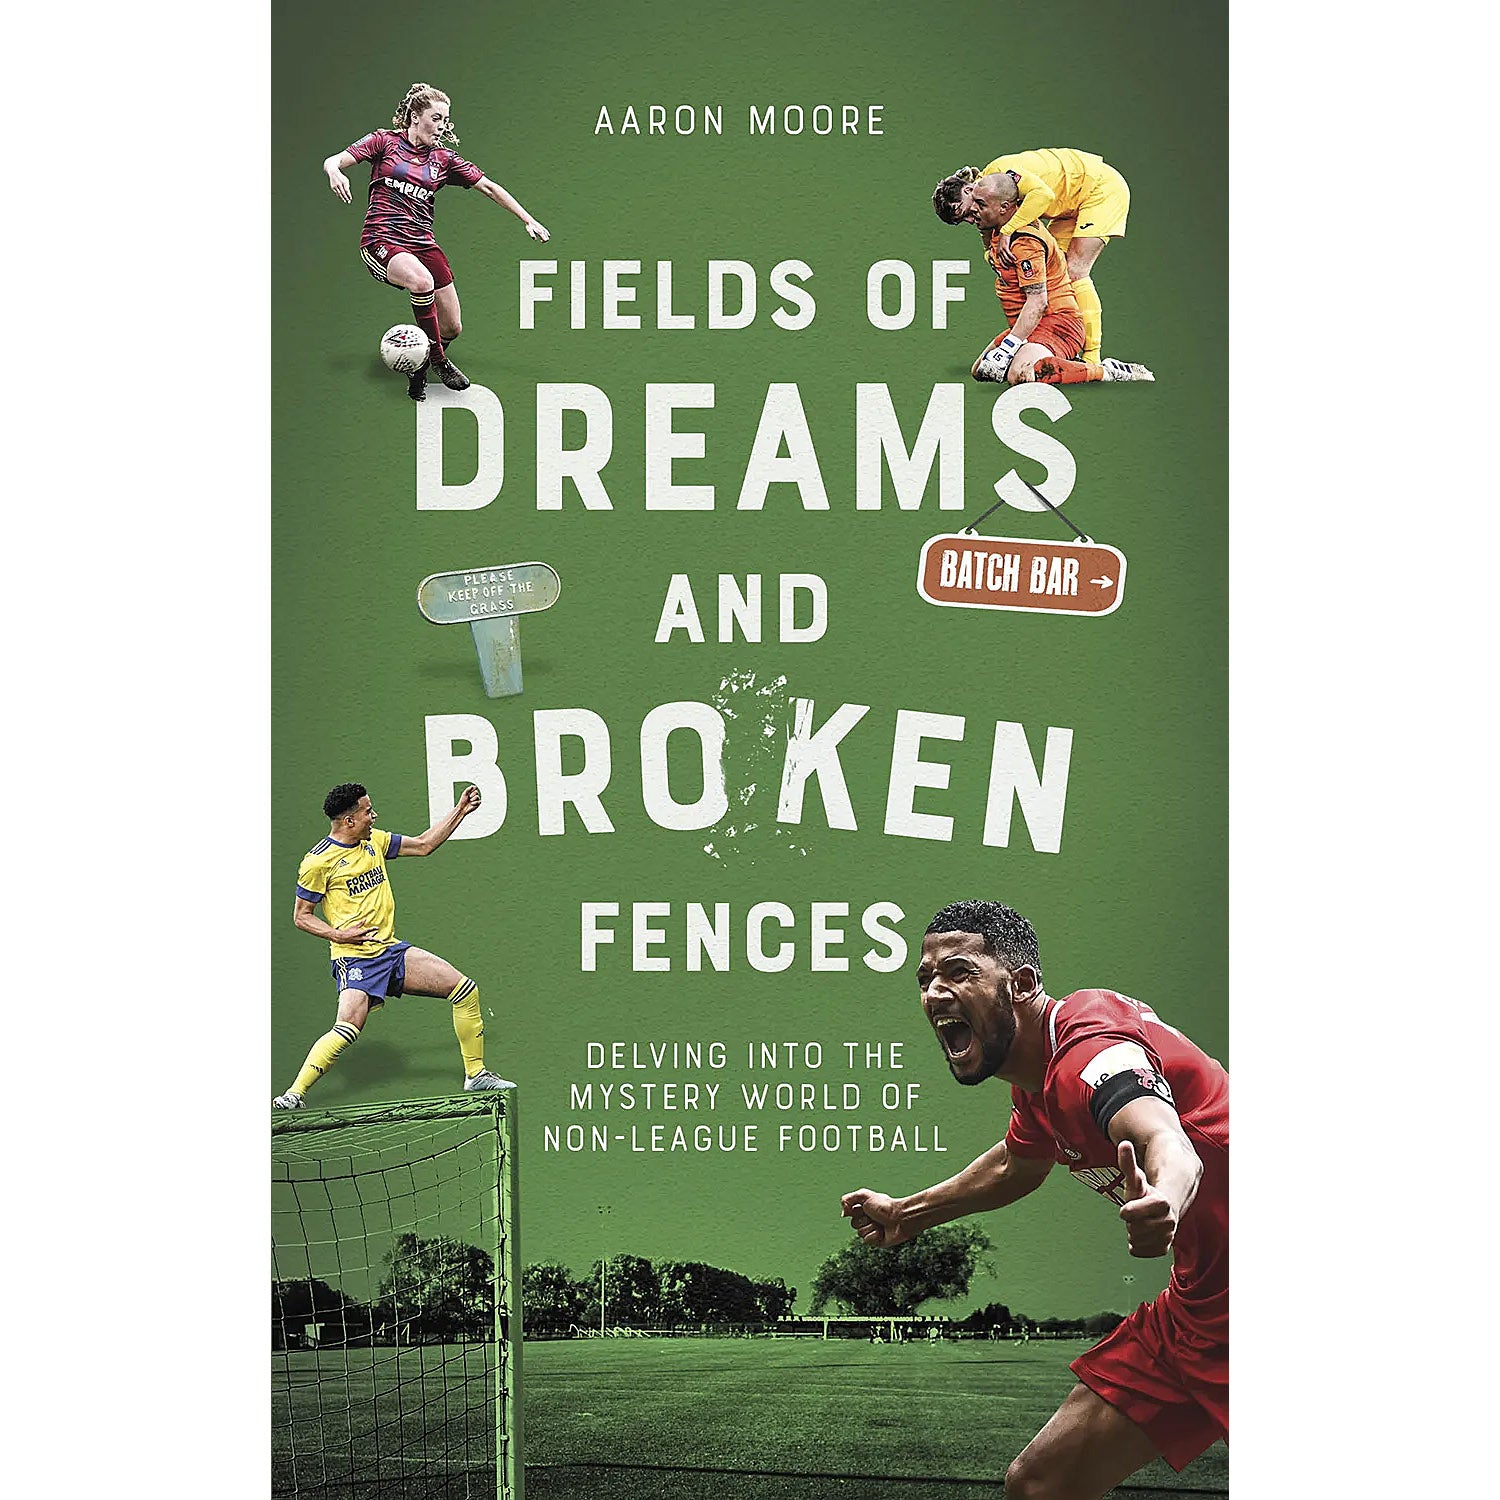 Fields of Dreams and Broken Fences – Delving into the Mystery World of Non-League Football